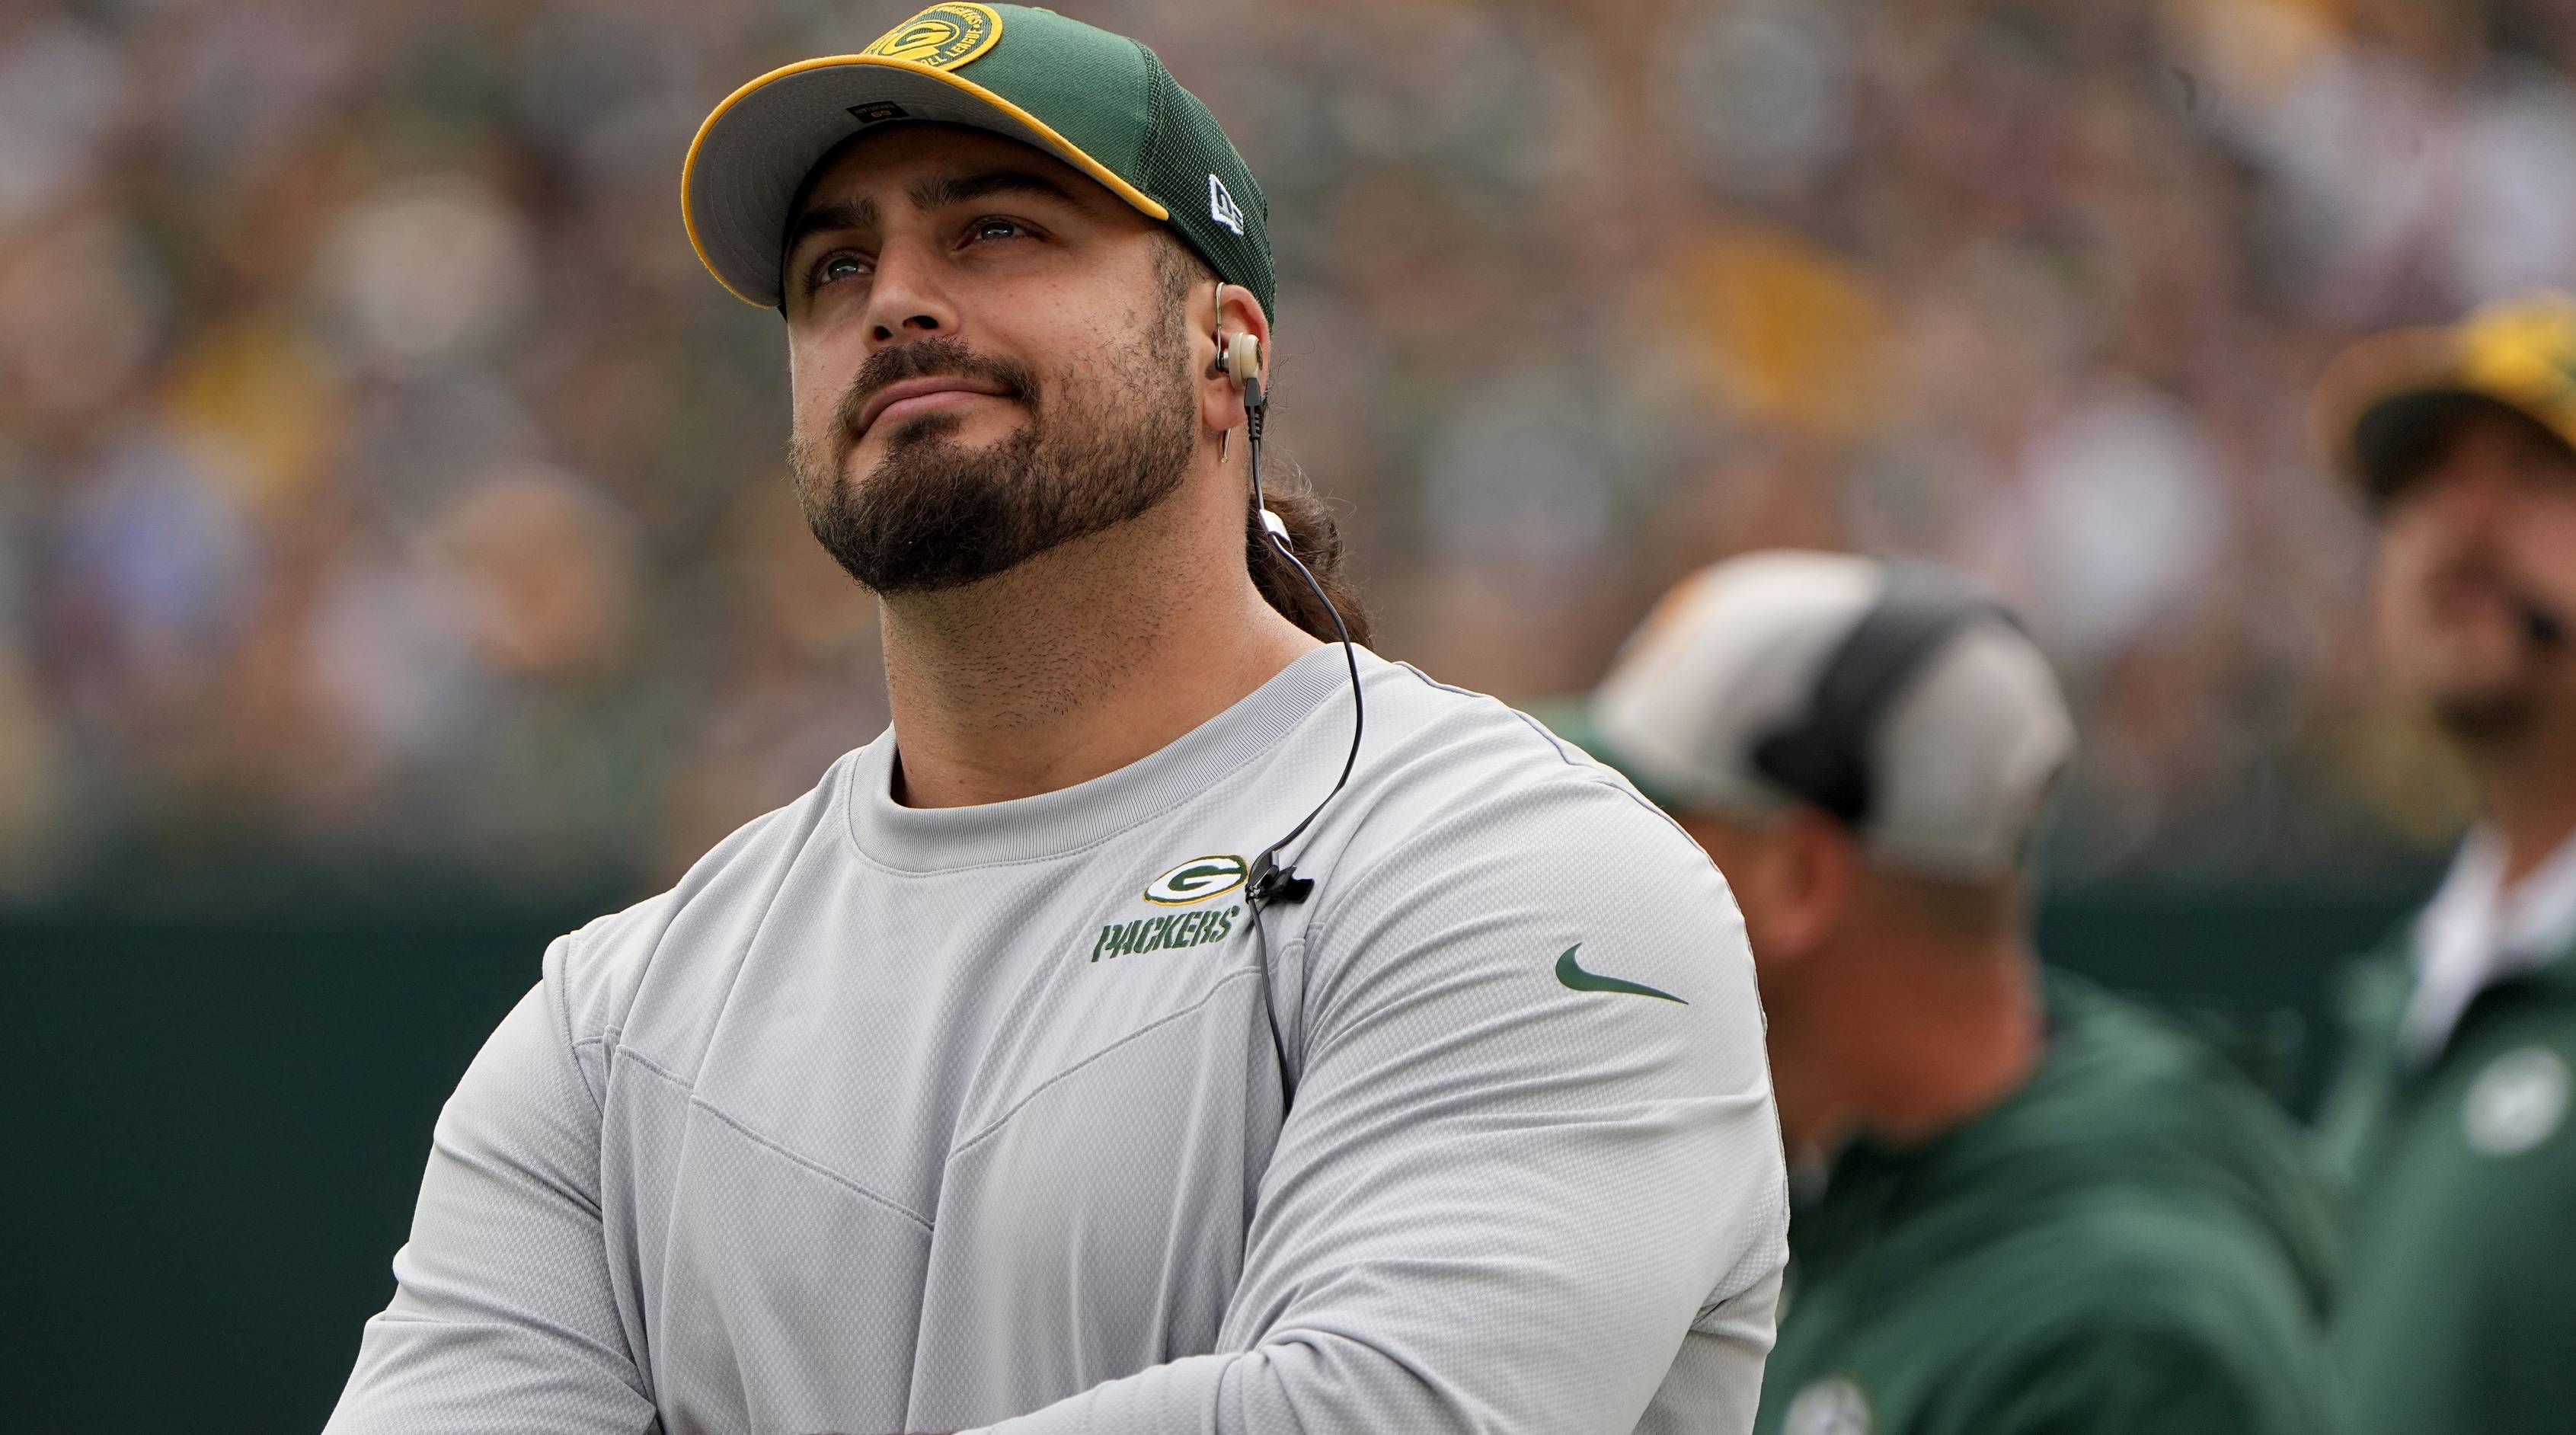 Packers offensive tackle David Bakhtiari looks on while inactive during a game.